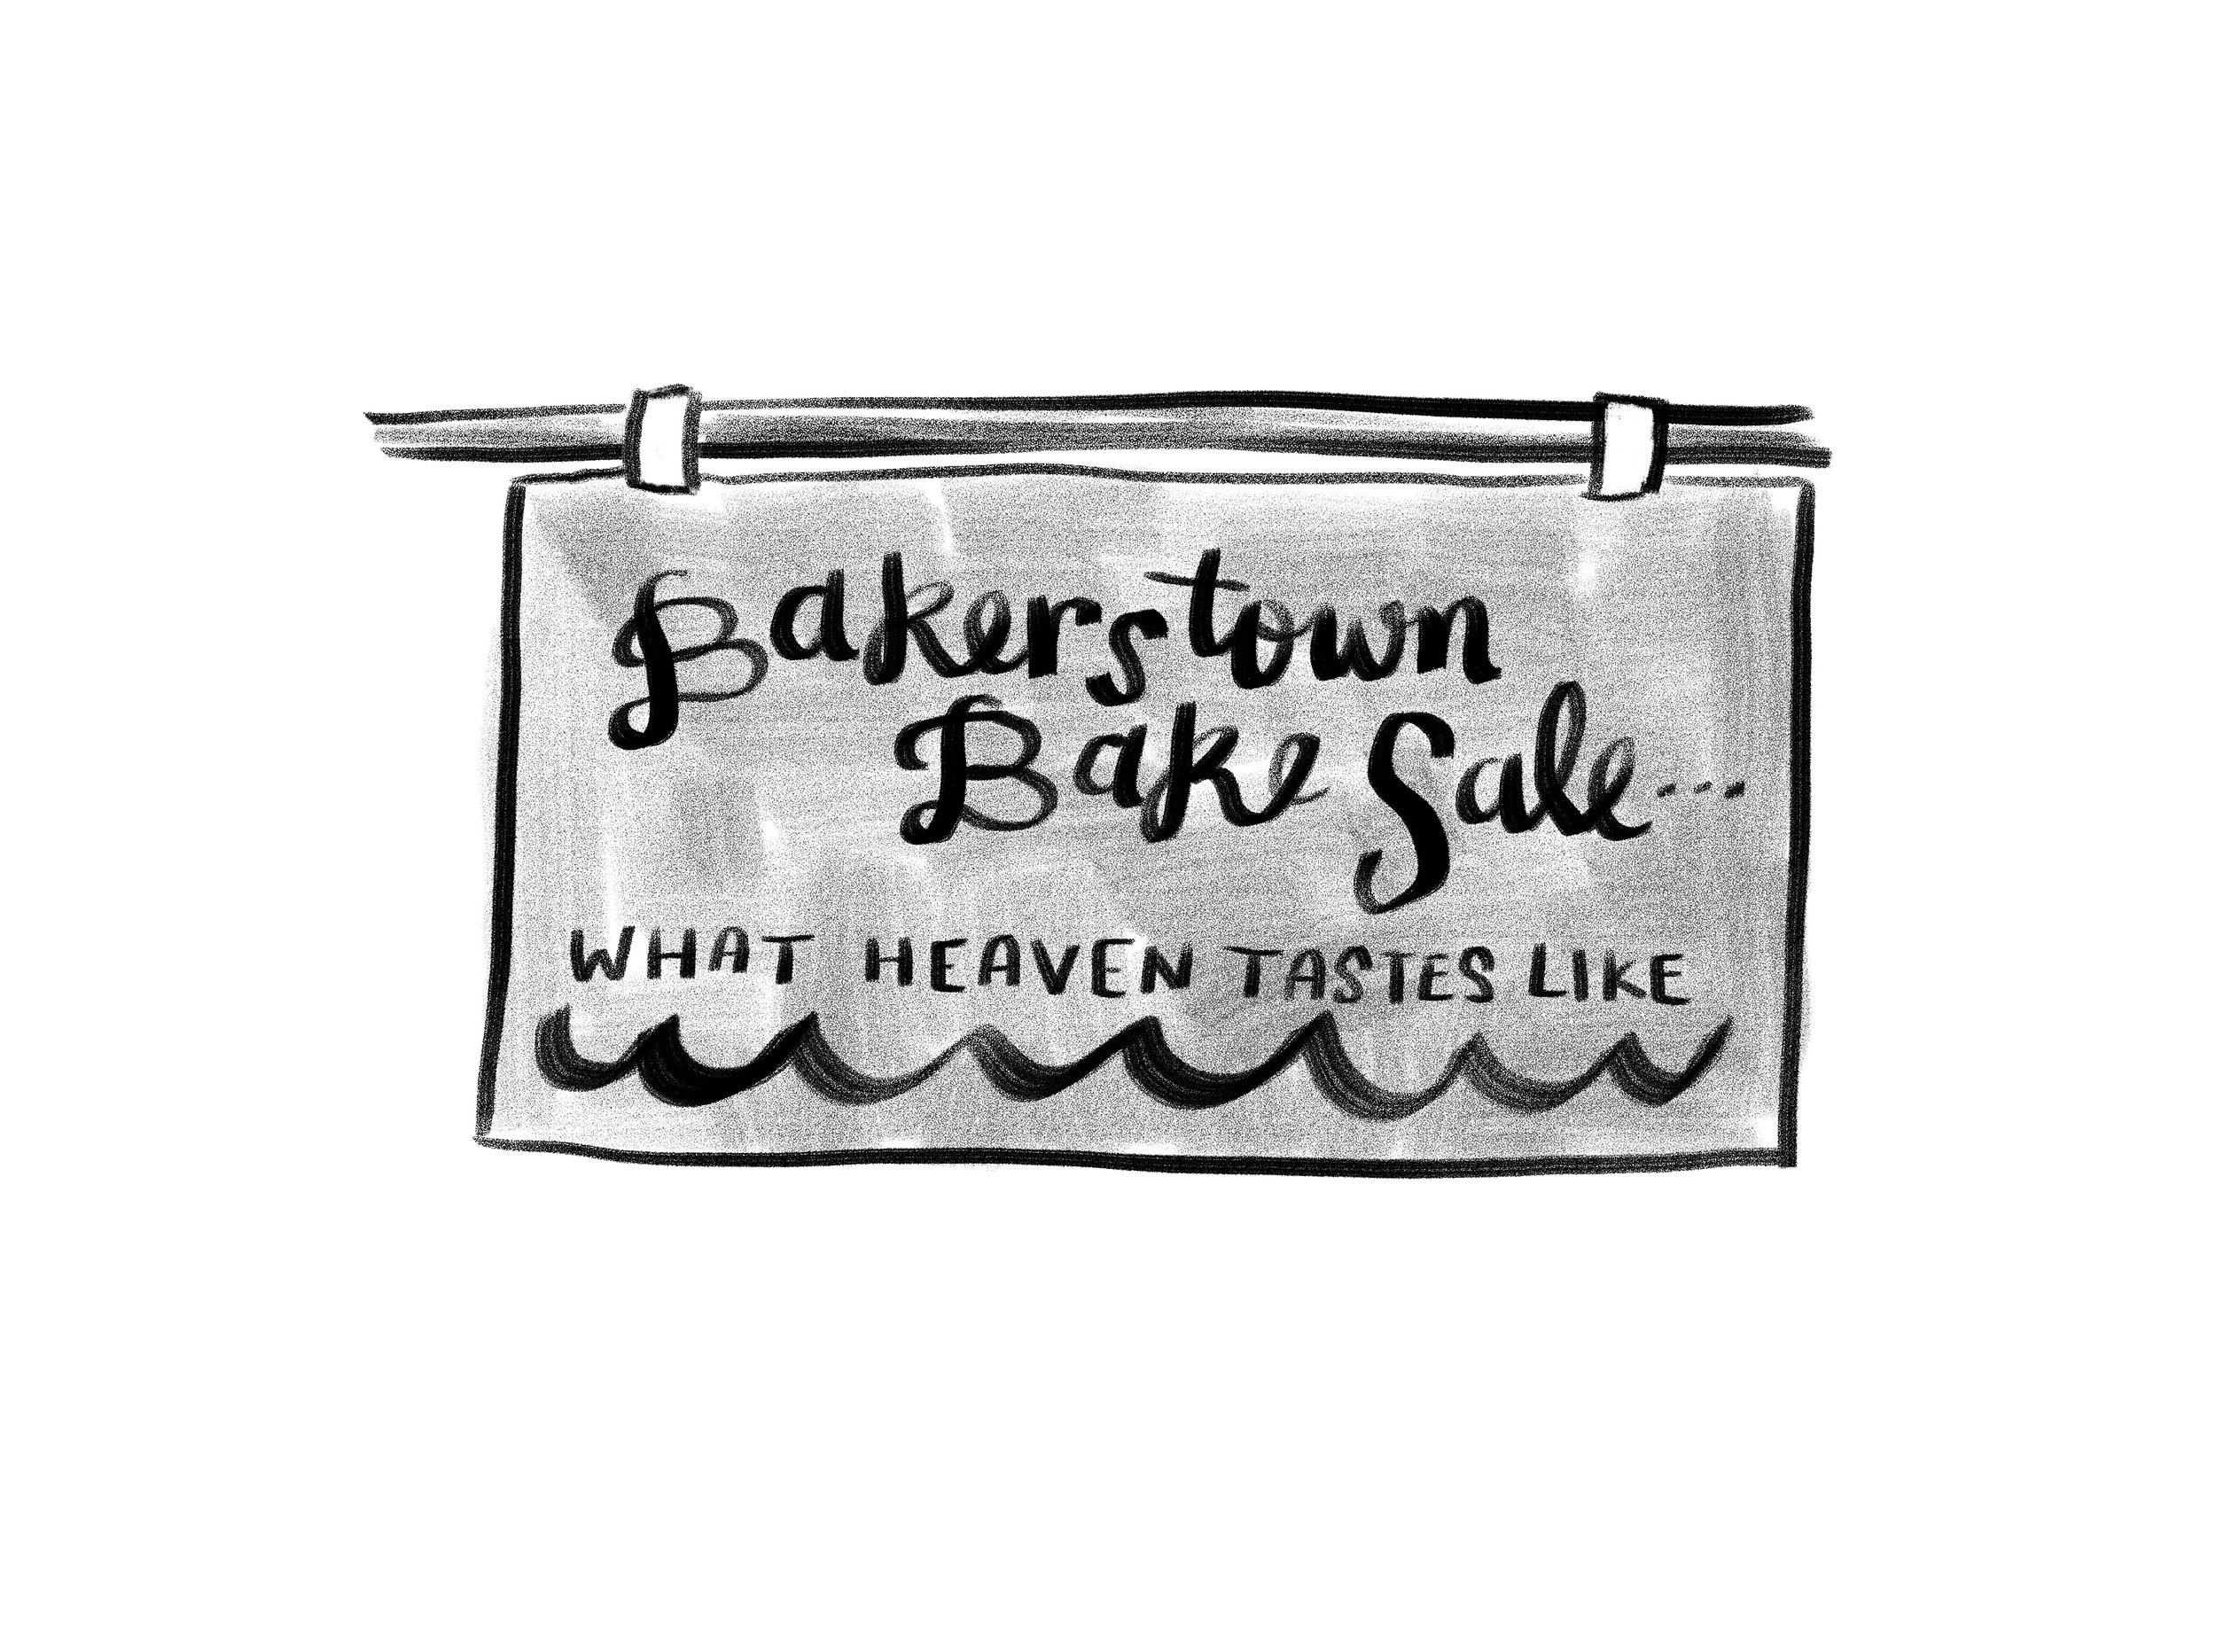 Baking is Messy and So is Life Interior Illustrations-Bake Sale Sign copy.jpg